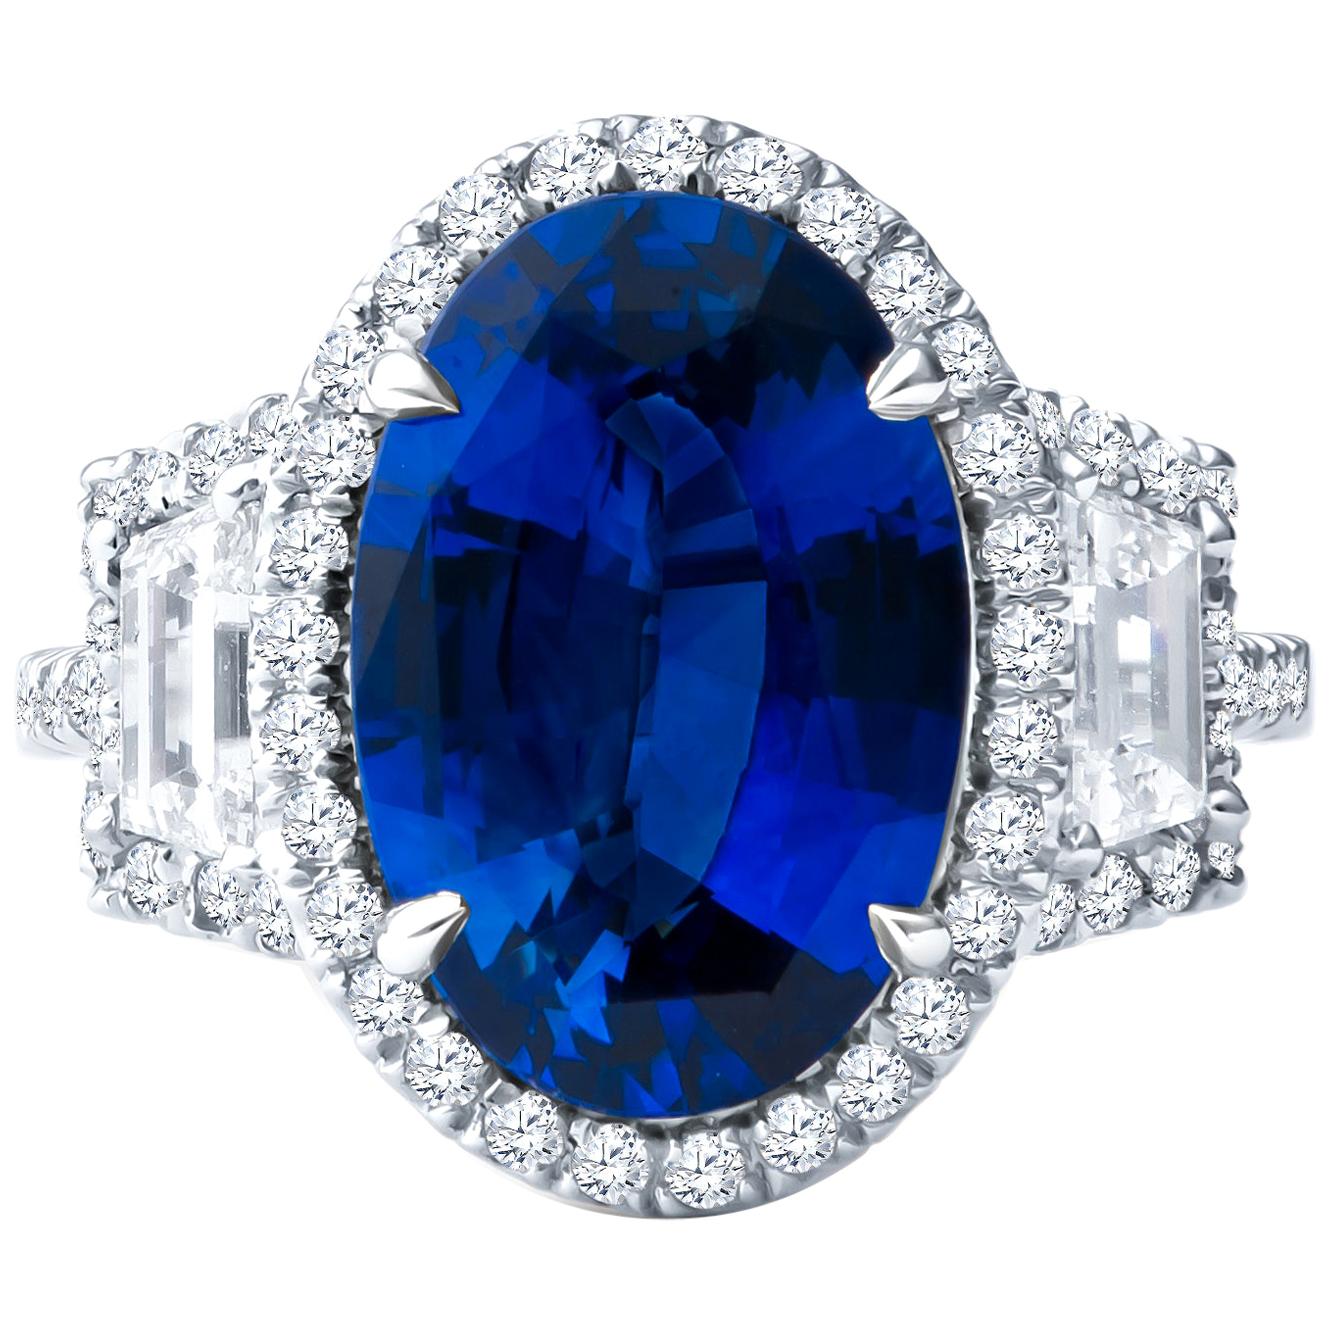 5.04ct Oval Sapphire with 0.68ctw Step Cut Trapezoid & 0.50ct Diamond Halo Ring